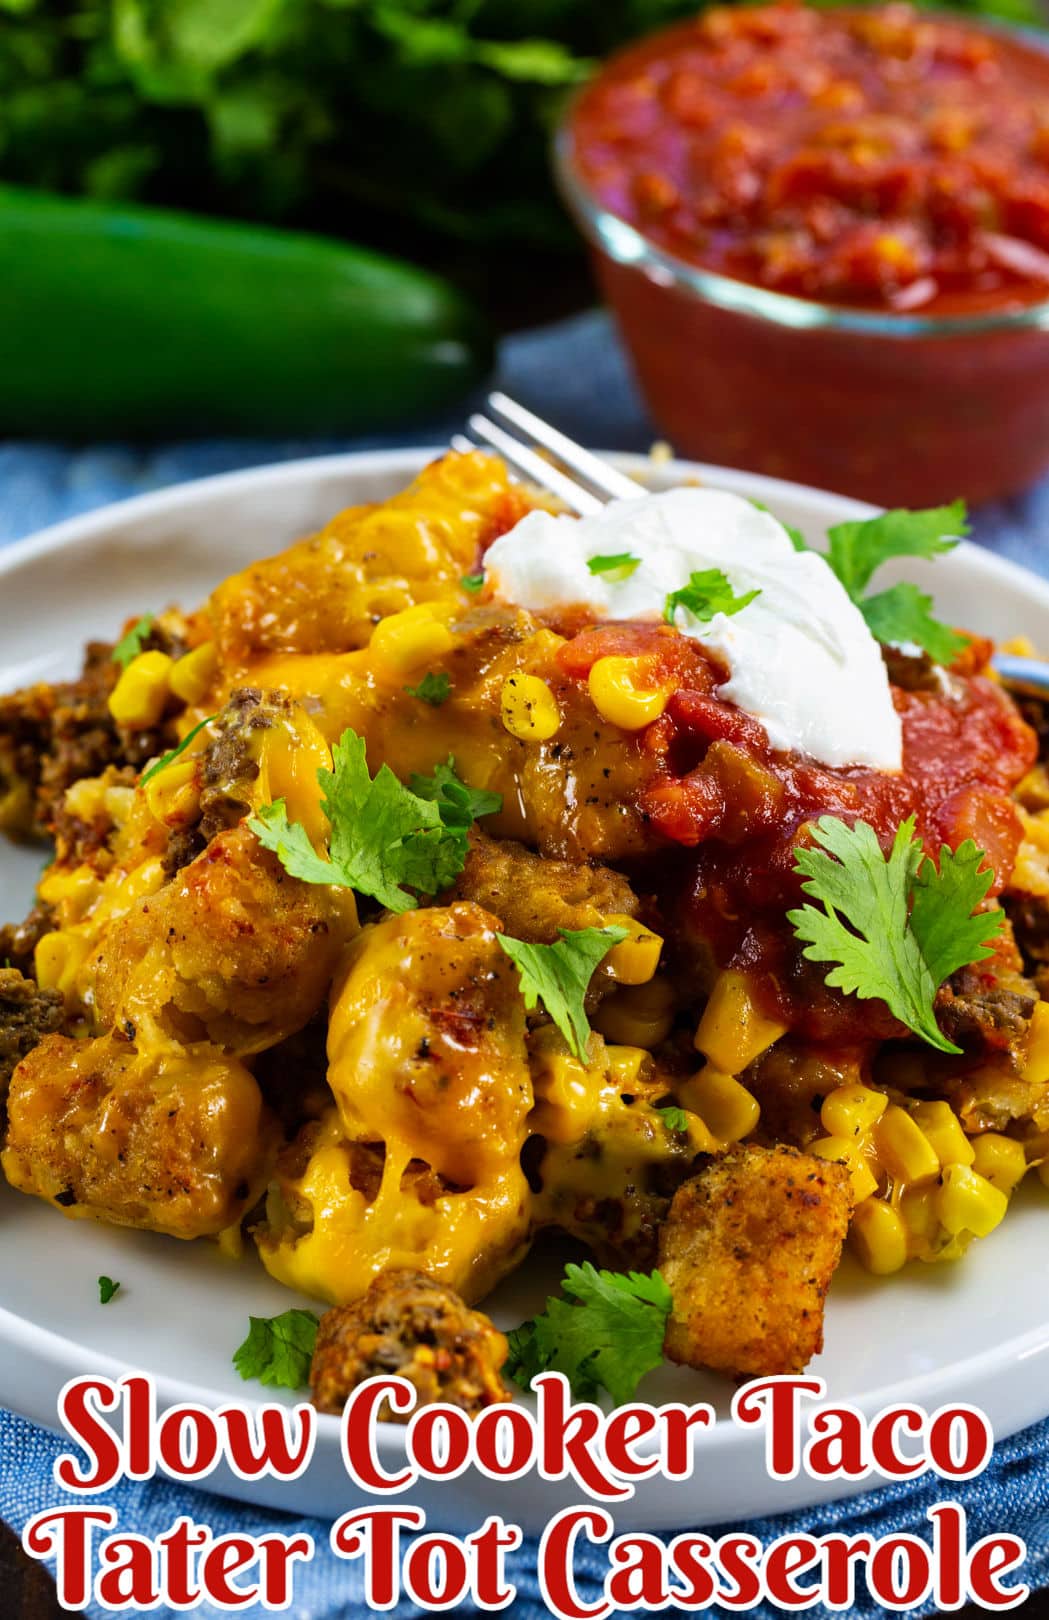 Slow Cooker Taco Tater Tot Casserole dished up on a plate.